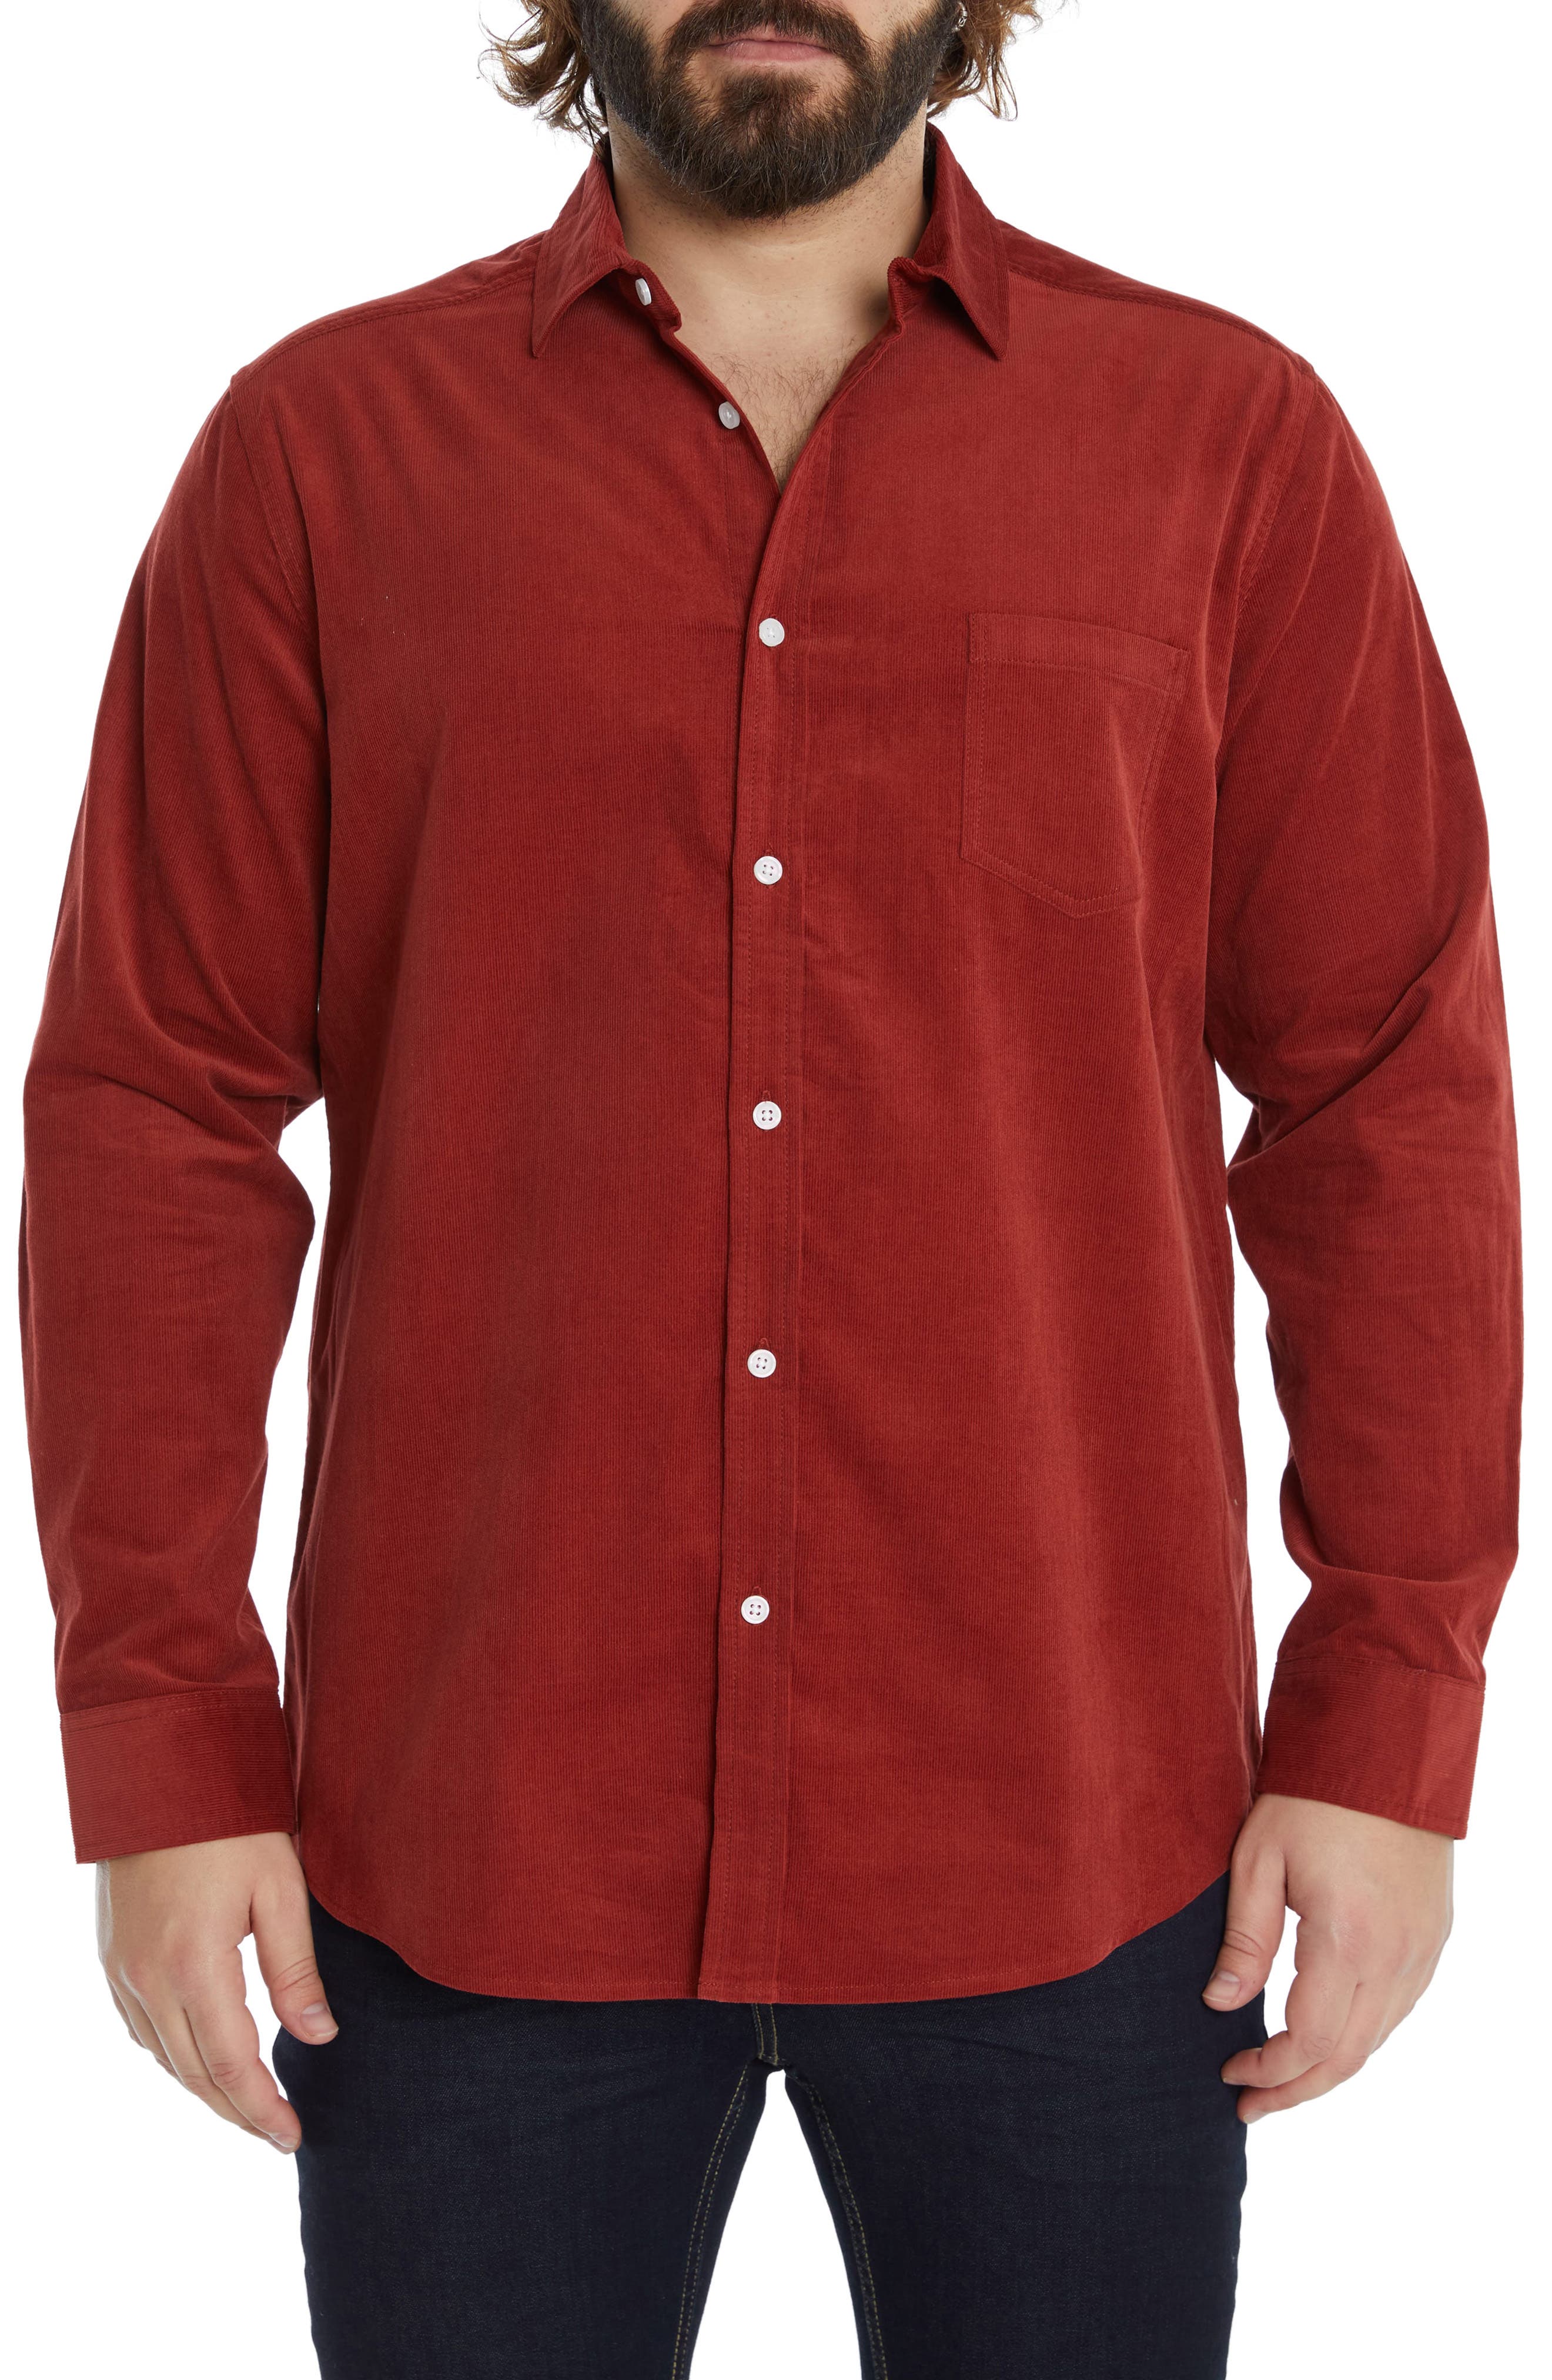 Johnny Bigg Cape Cord Button-Up Shirt in Rust